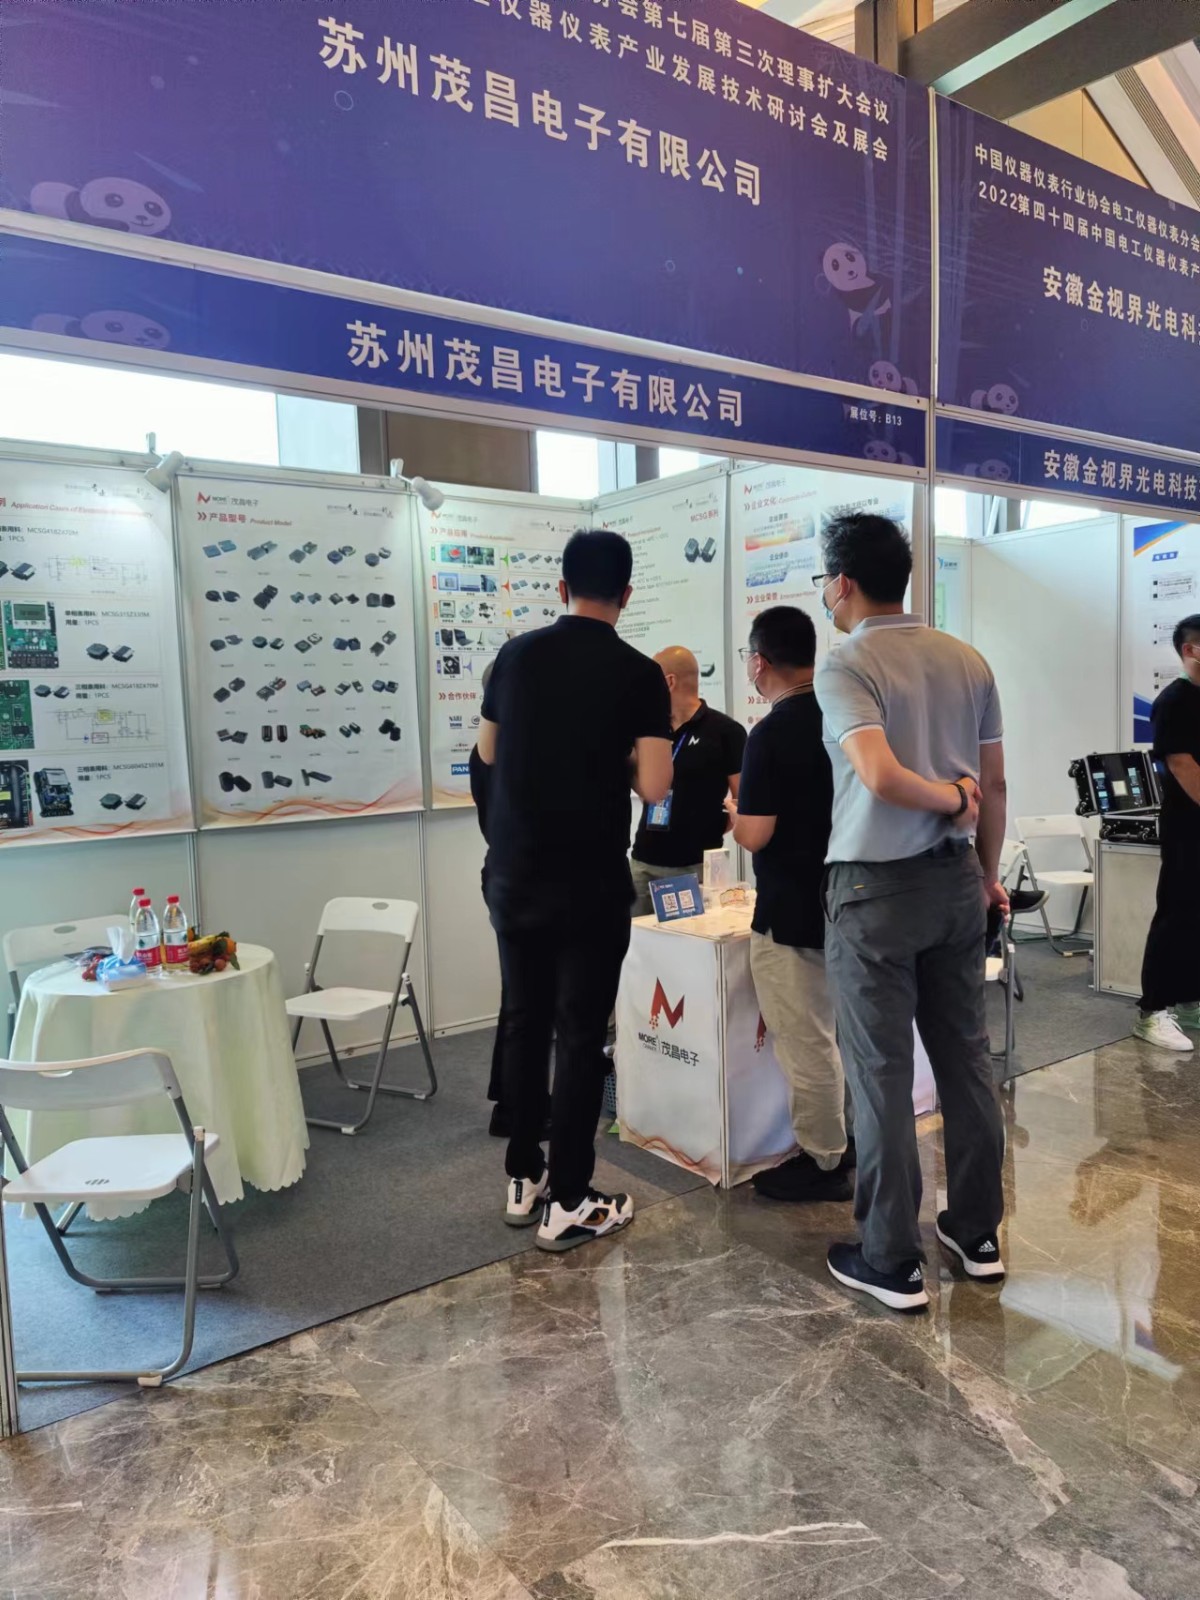 The 44th China Electrical Instrumentation Exhibition